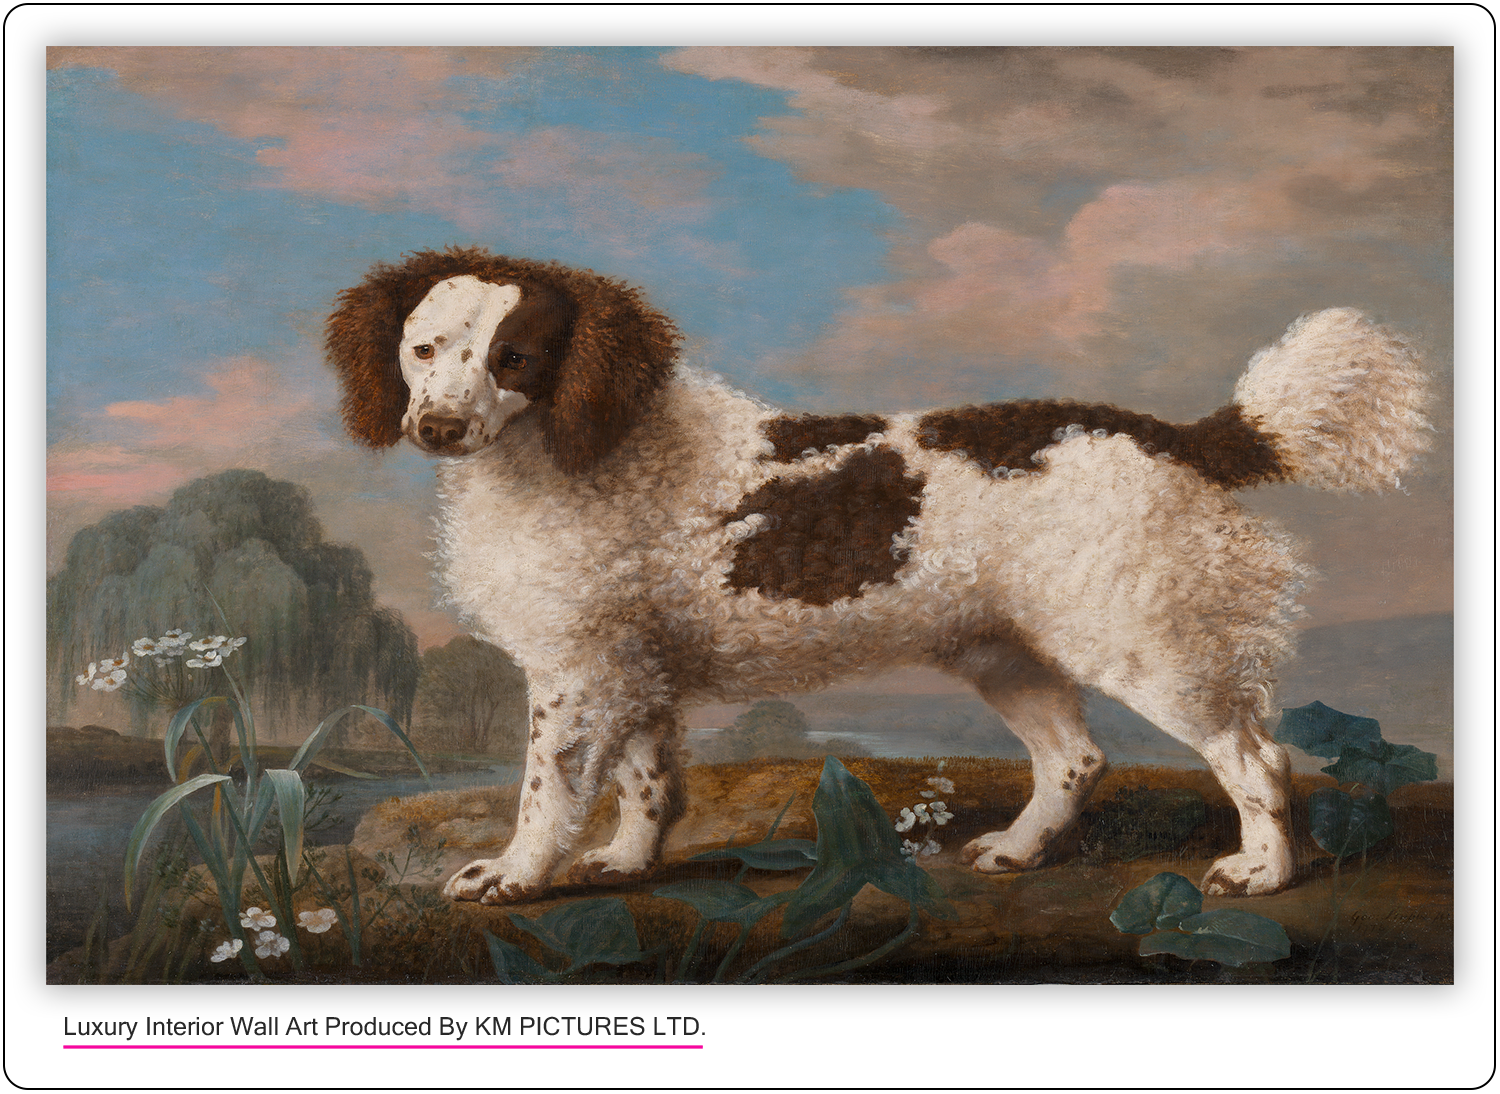 Brown and White Norfolk or Water Spaniel, 1778